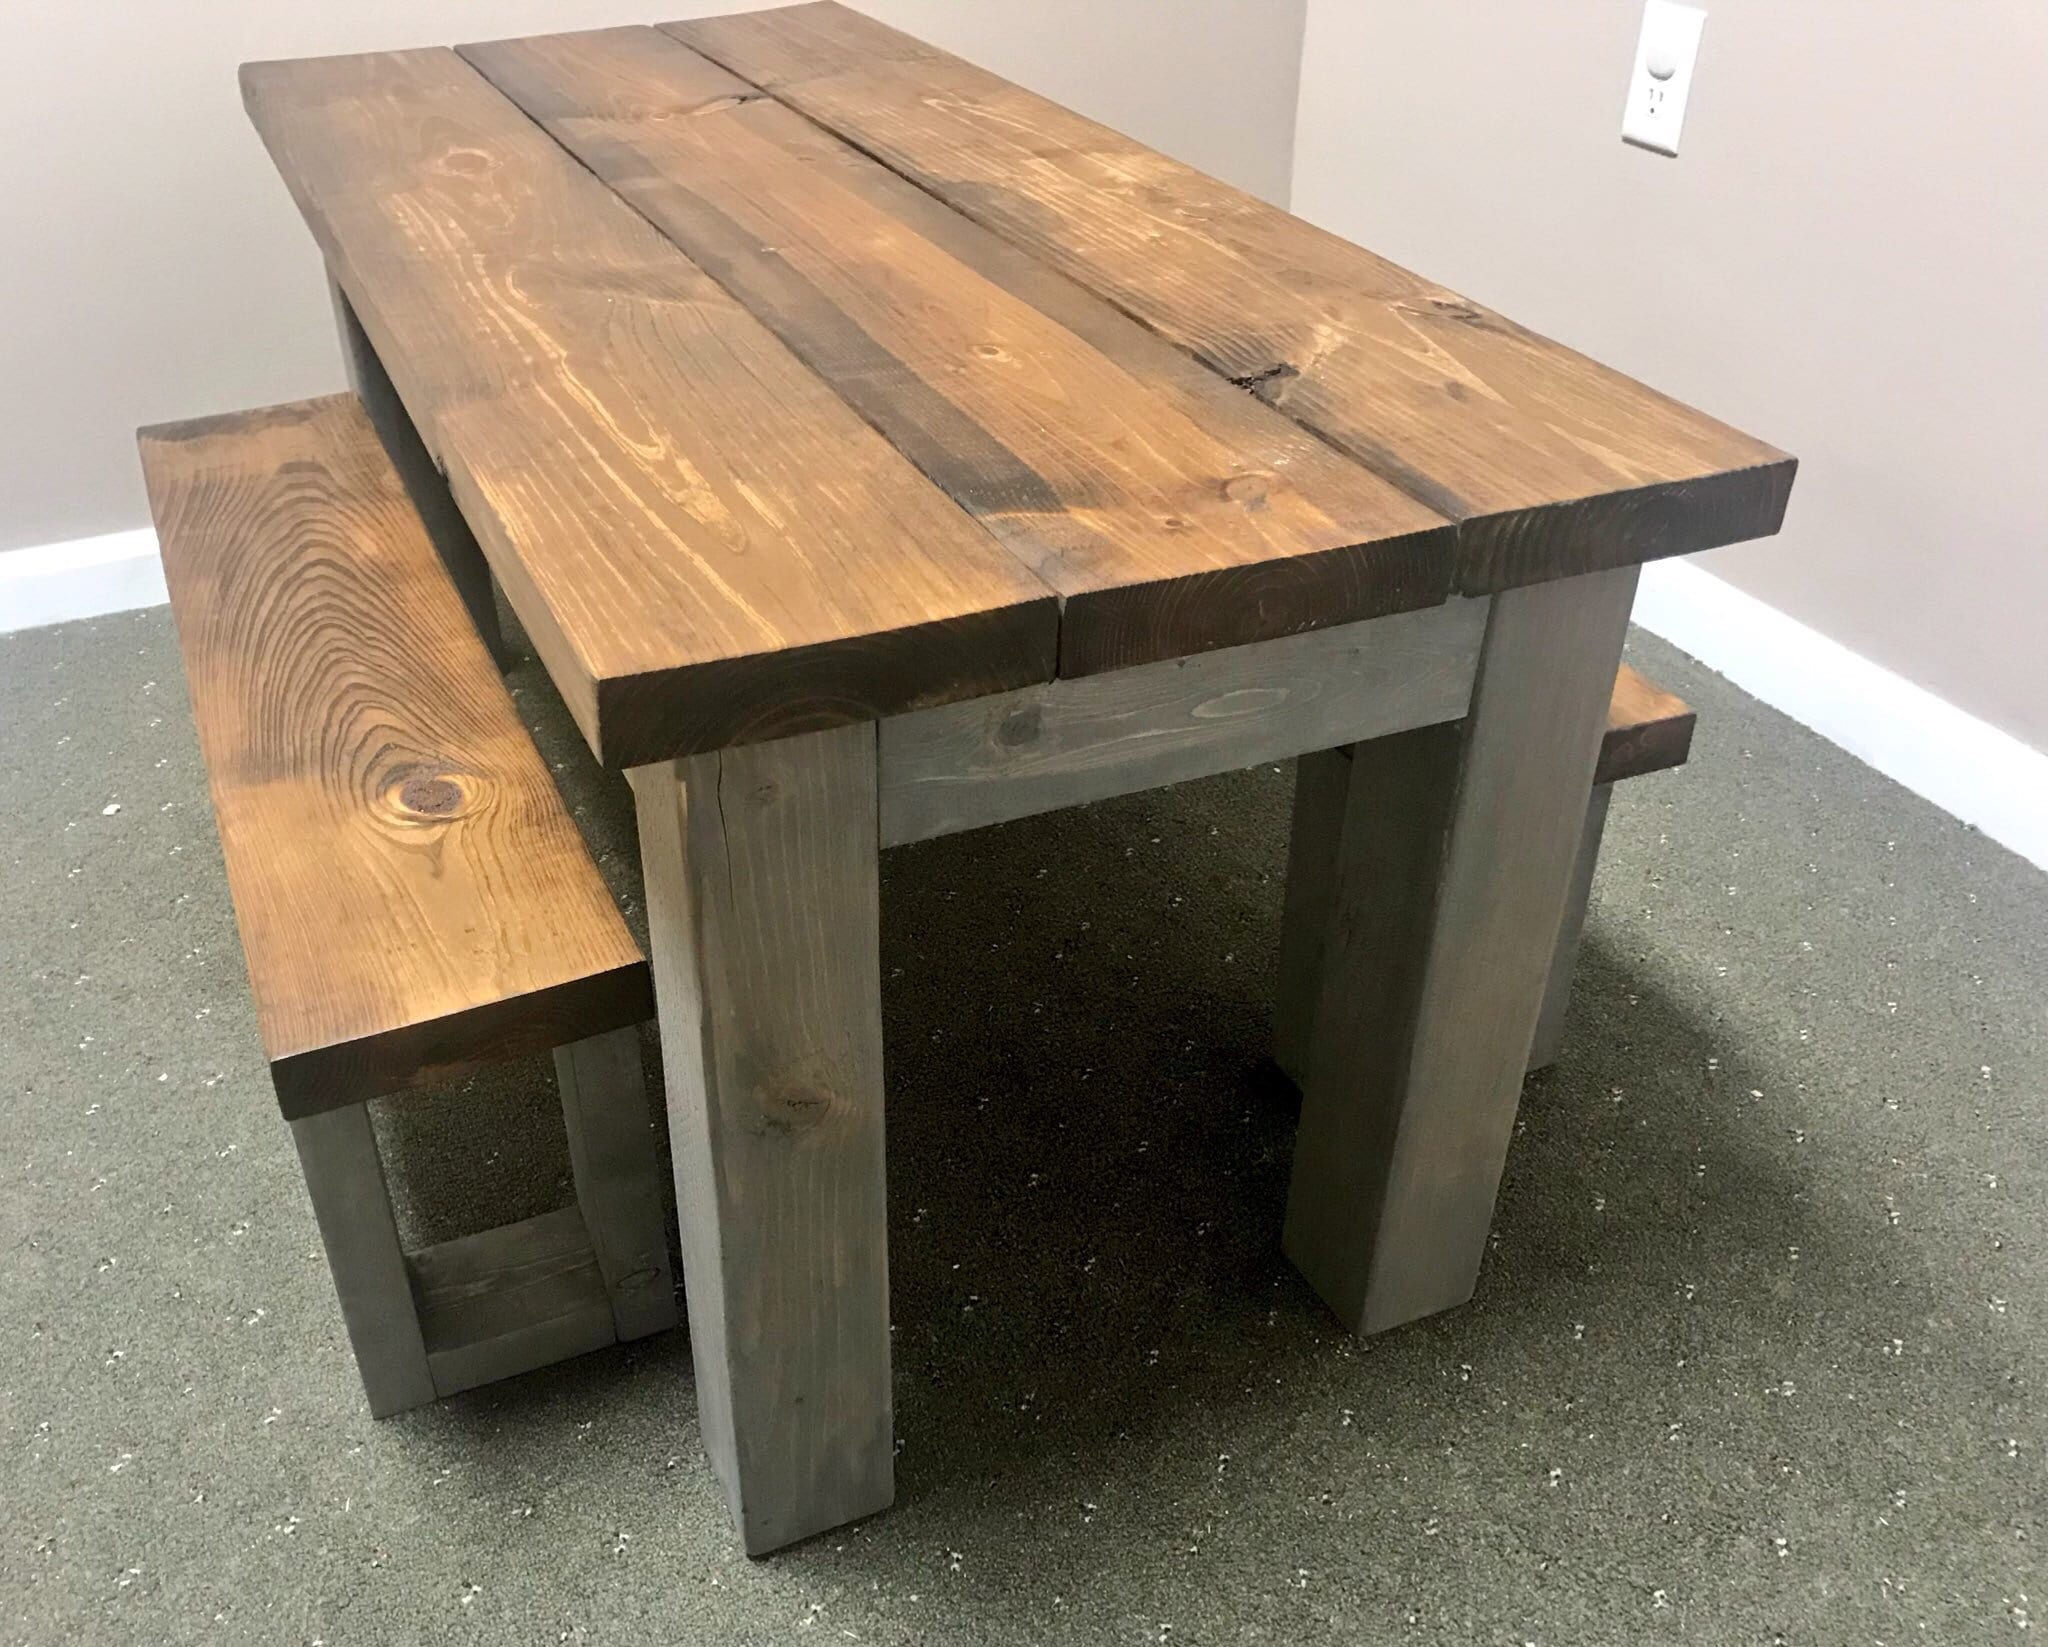 kids table with benches